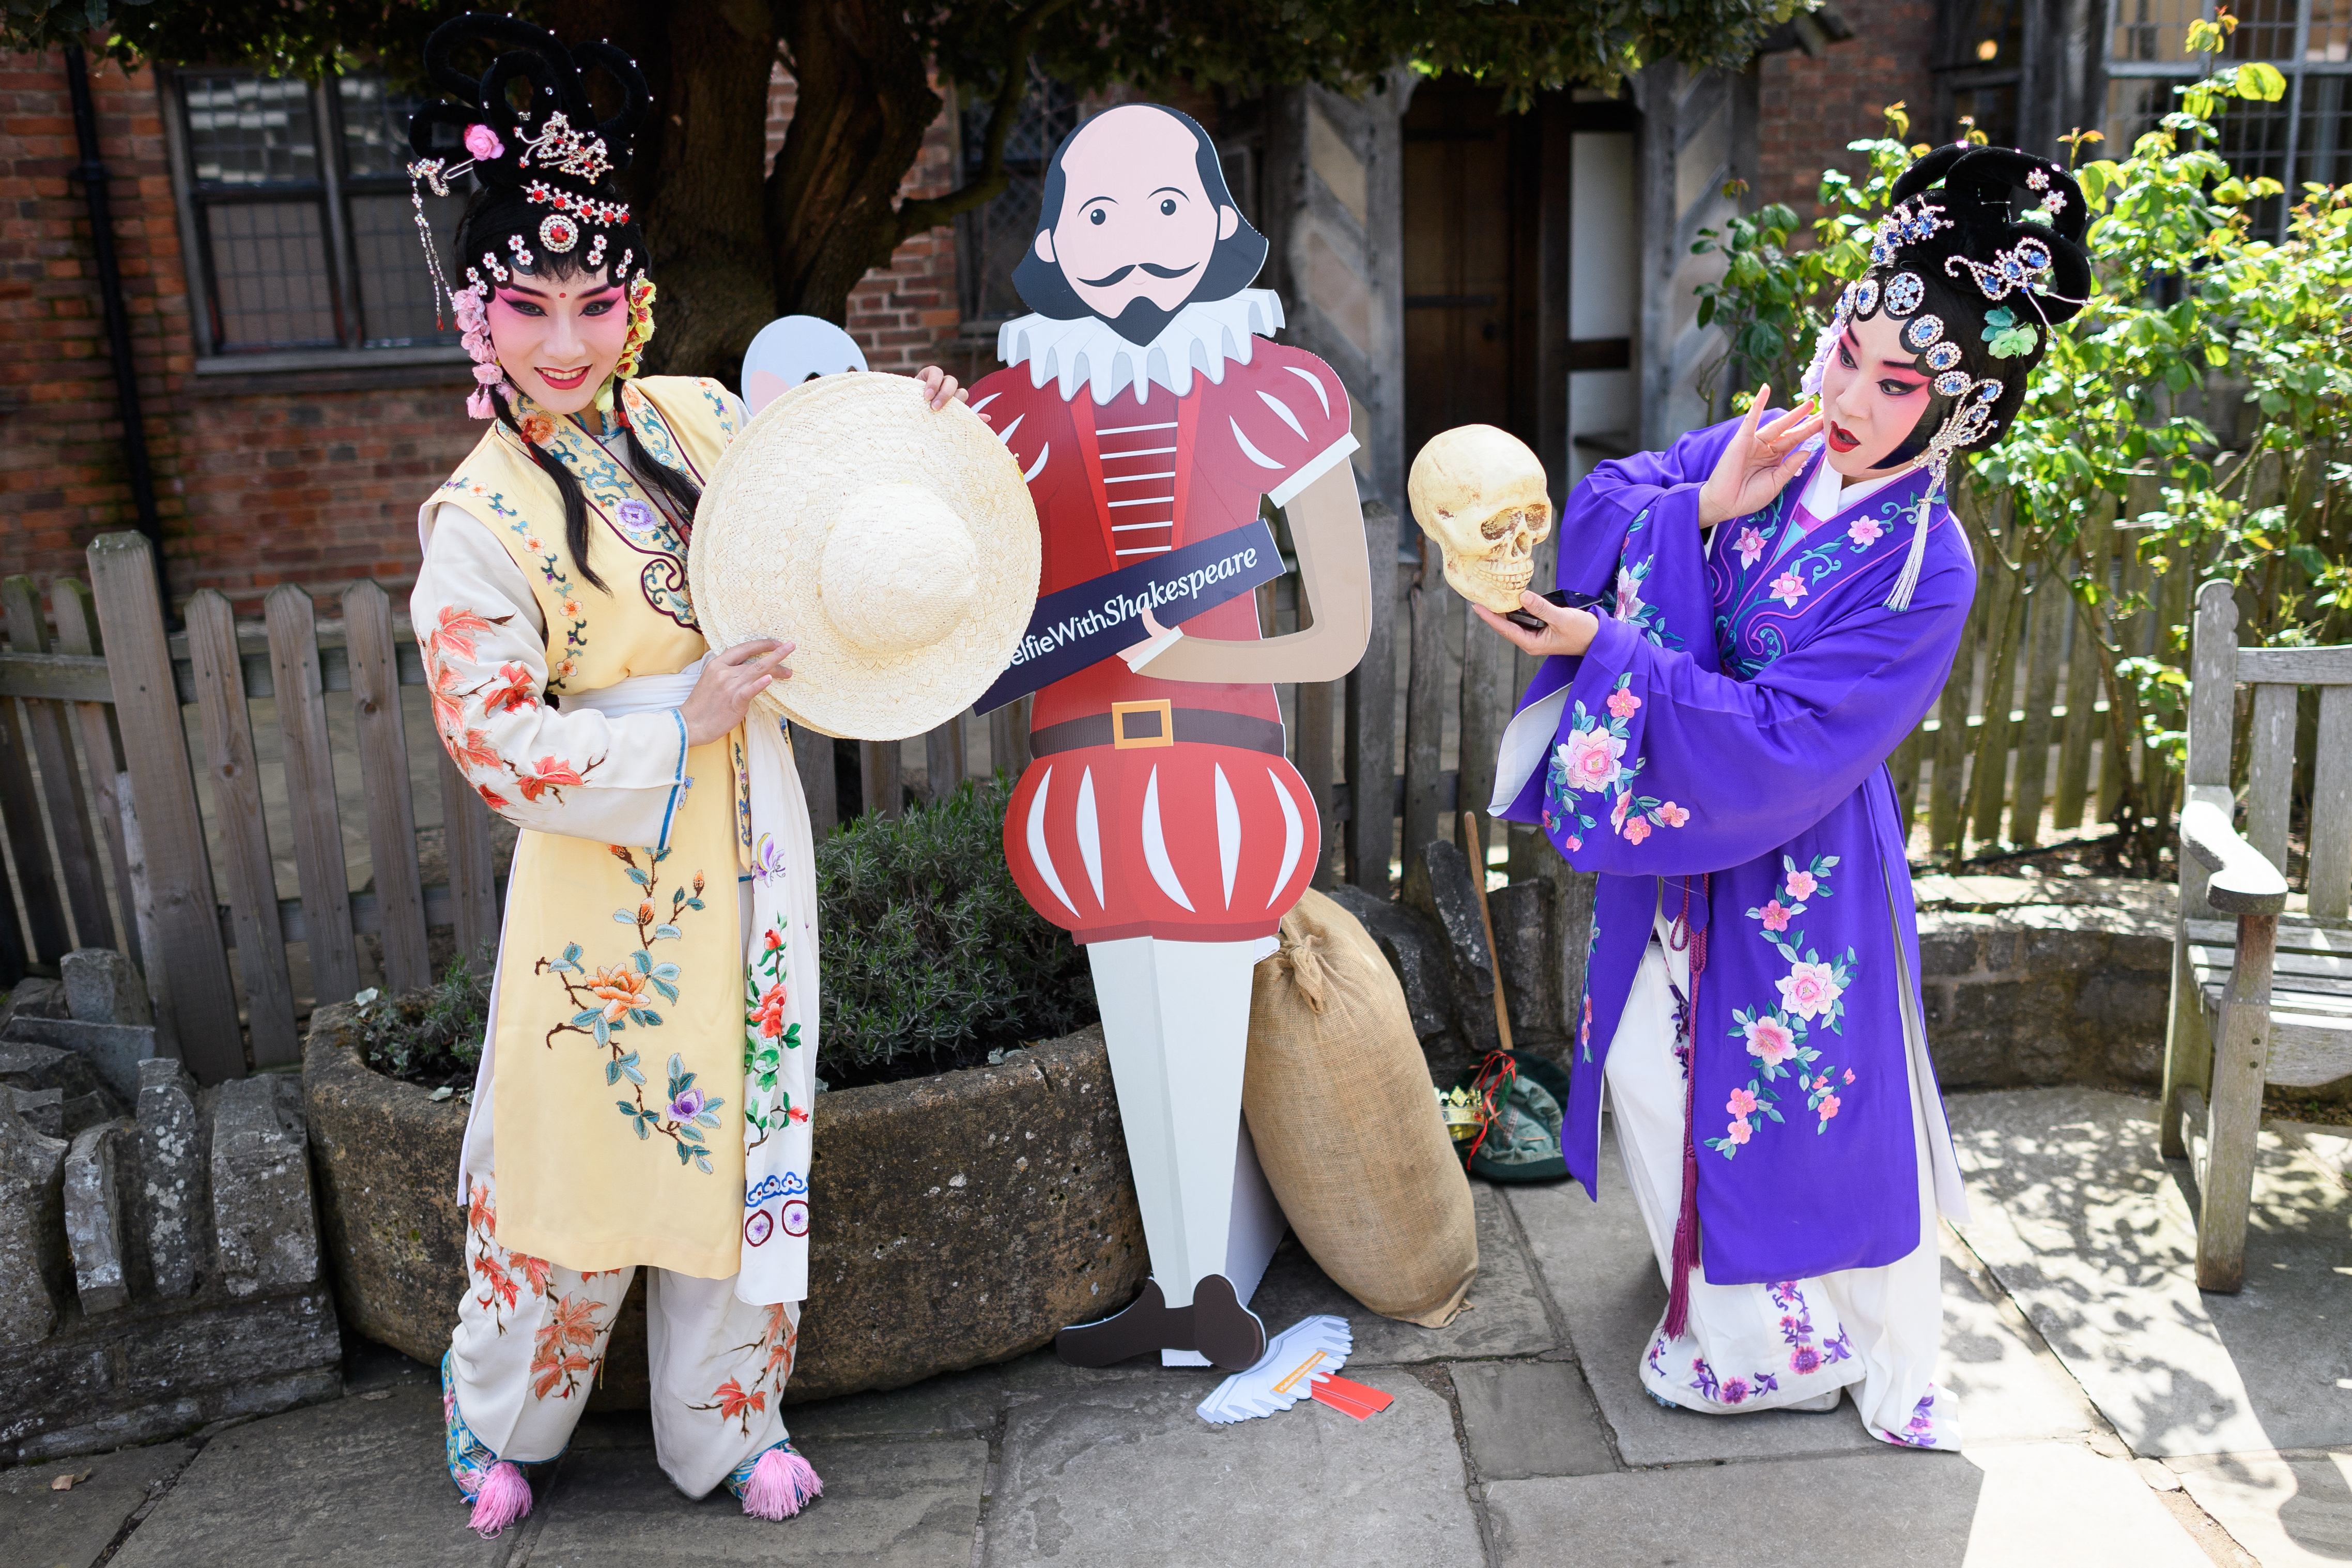 Chinese actors pose and perform in the gardens of author William Shakespeare's birthplace during events to mark 400 years since Shakespeare's death, in Stratford-upon-Avon in central England on April 23, 2016./AFP